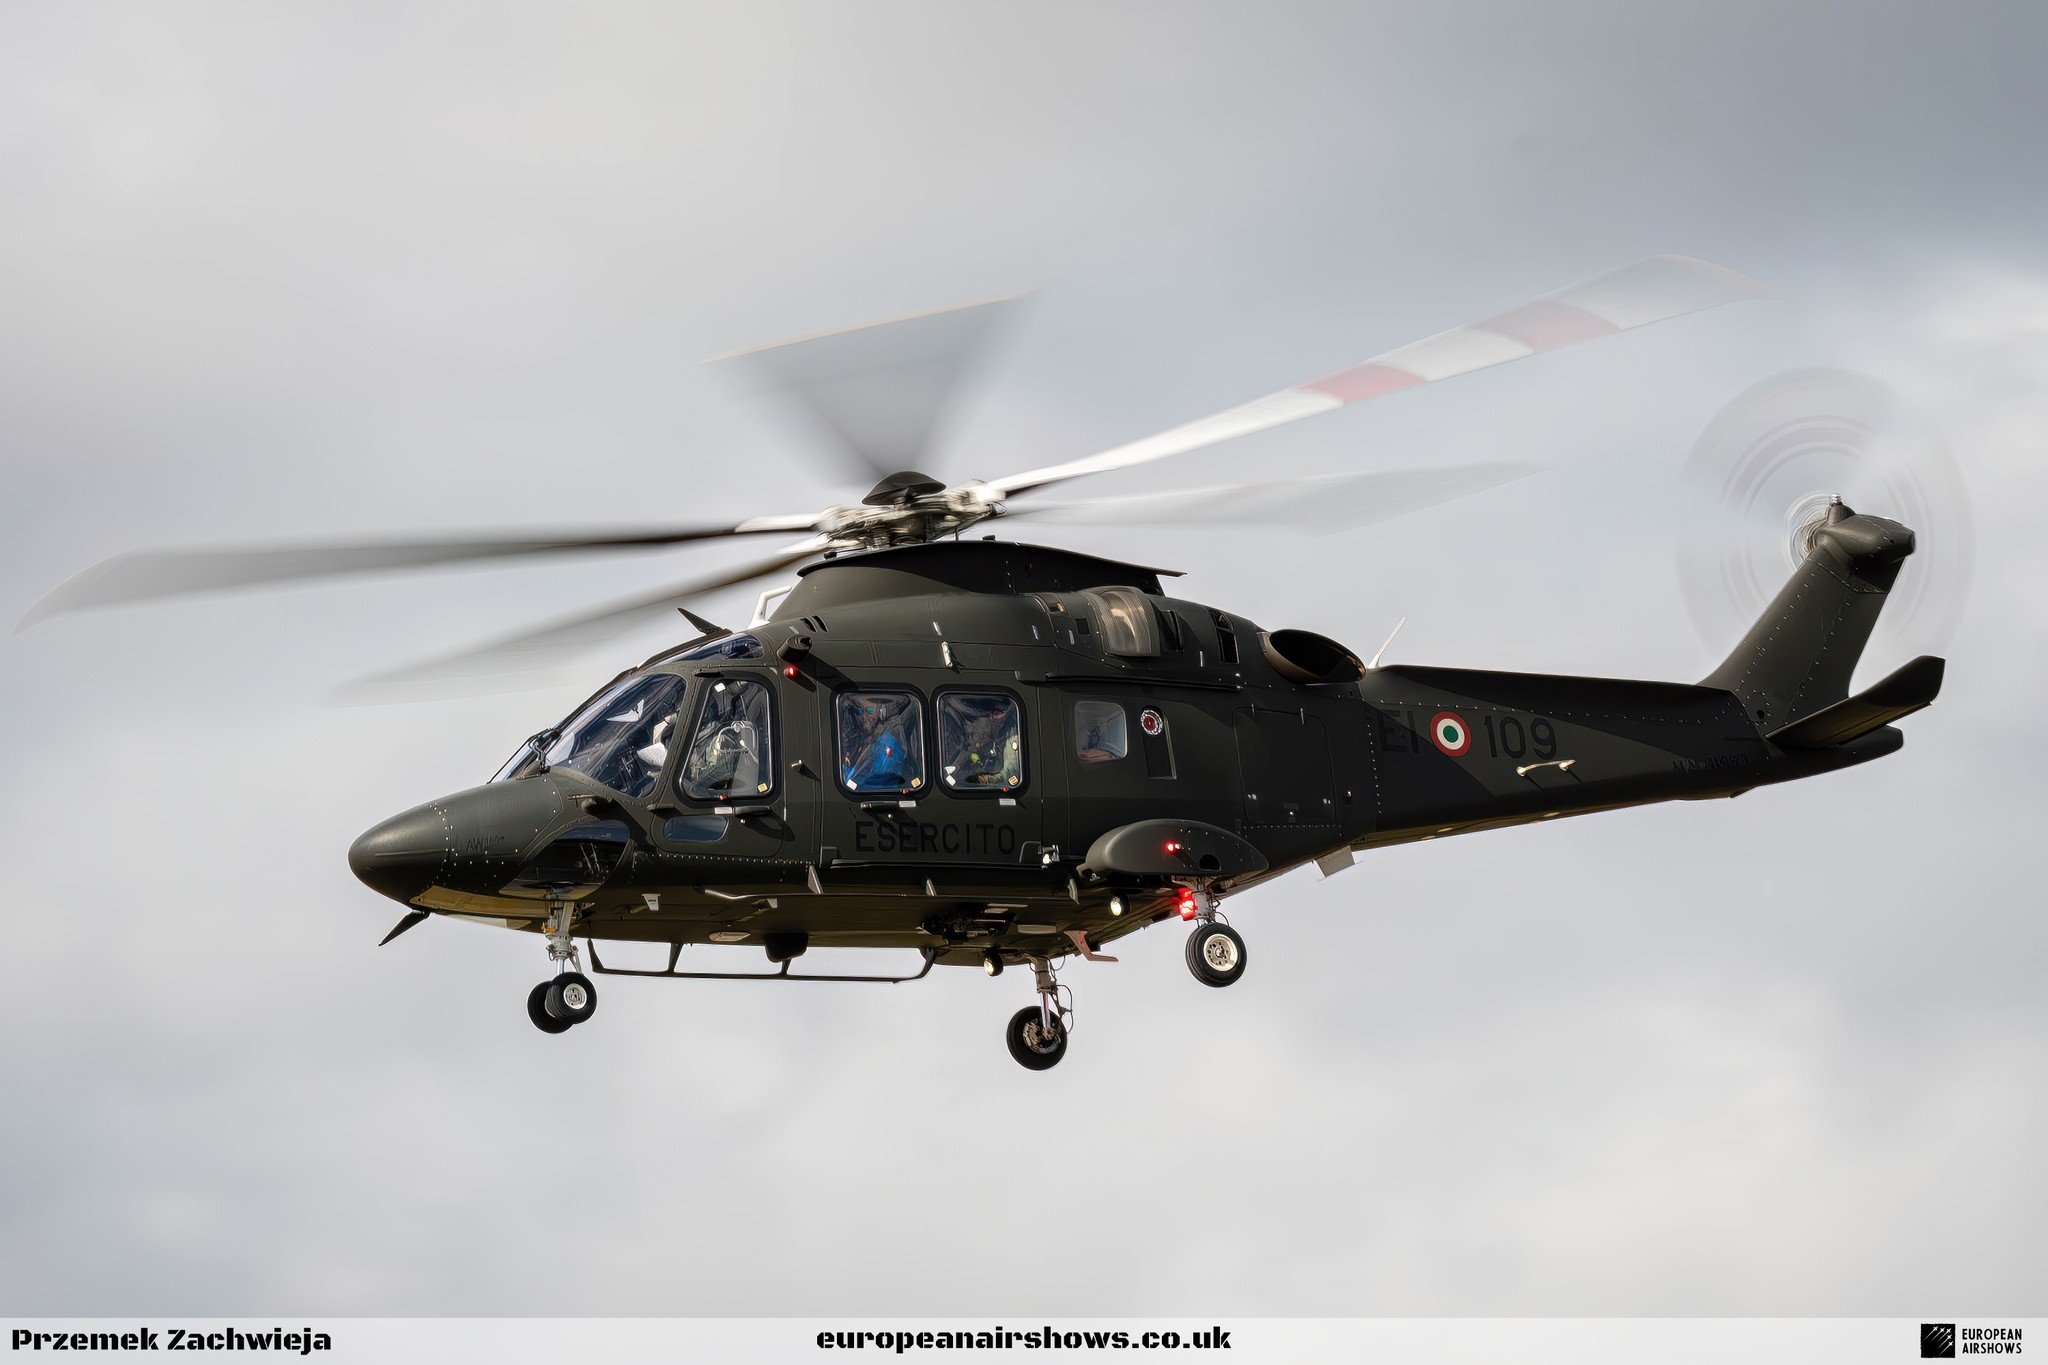 #Onthisday📅 10 May 2012, AgustaWestland AW169 performed its first flight. 

The AgustaWestland (now Leonardo) AW169 is a twin-engine, 10-seat, 4.8t helicopter. It has enjoyed civilian and military success. As a utility helicopter, the type can hold 